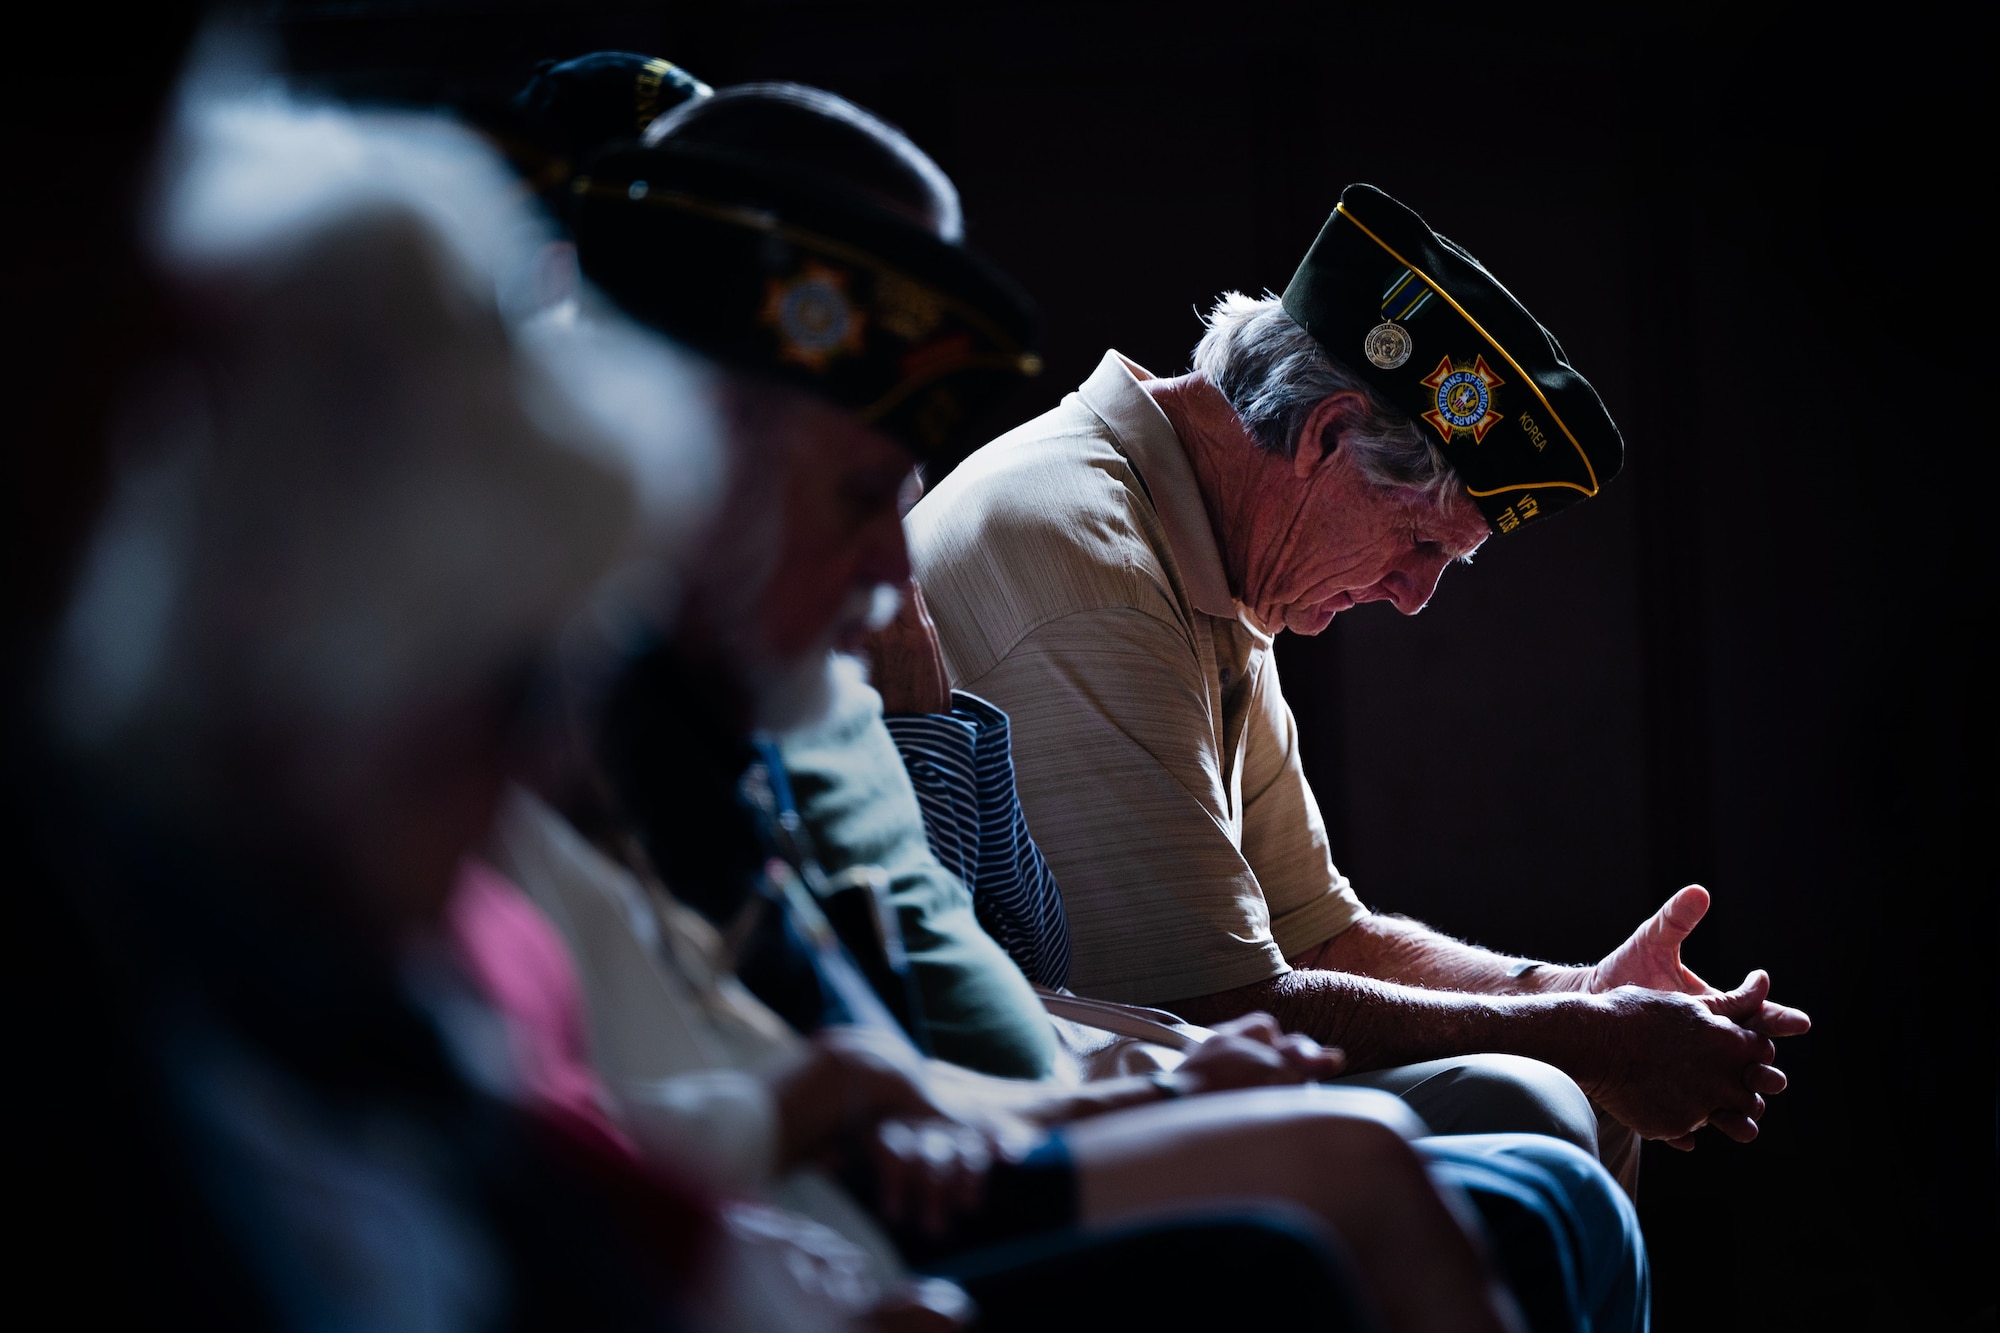 A veteran participates in a moment of silence during a Memorial Day ceremony at the Solvang Veterans Memorial Hall in Solvang, Calif., May 29, 2023. U.S. Space Force Maj. Gen. Douglas A. Schiess, Combined Force Space Component Command commander, gave the keynote speech to over 200 attendees that included veterans from the Global War on Terrorism, Vietnam, Korea and even one veteran from WWII. The ceremony also included the raising on the American Flag by a local Cub Scouts group and a laying of a wreath with a Gold Star family member. (U.S. Space Force photo by Tech. Sgt. Luke Kitterman)